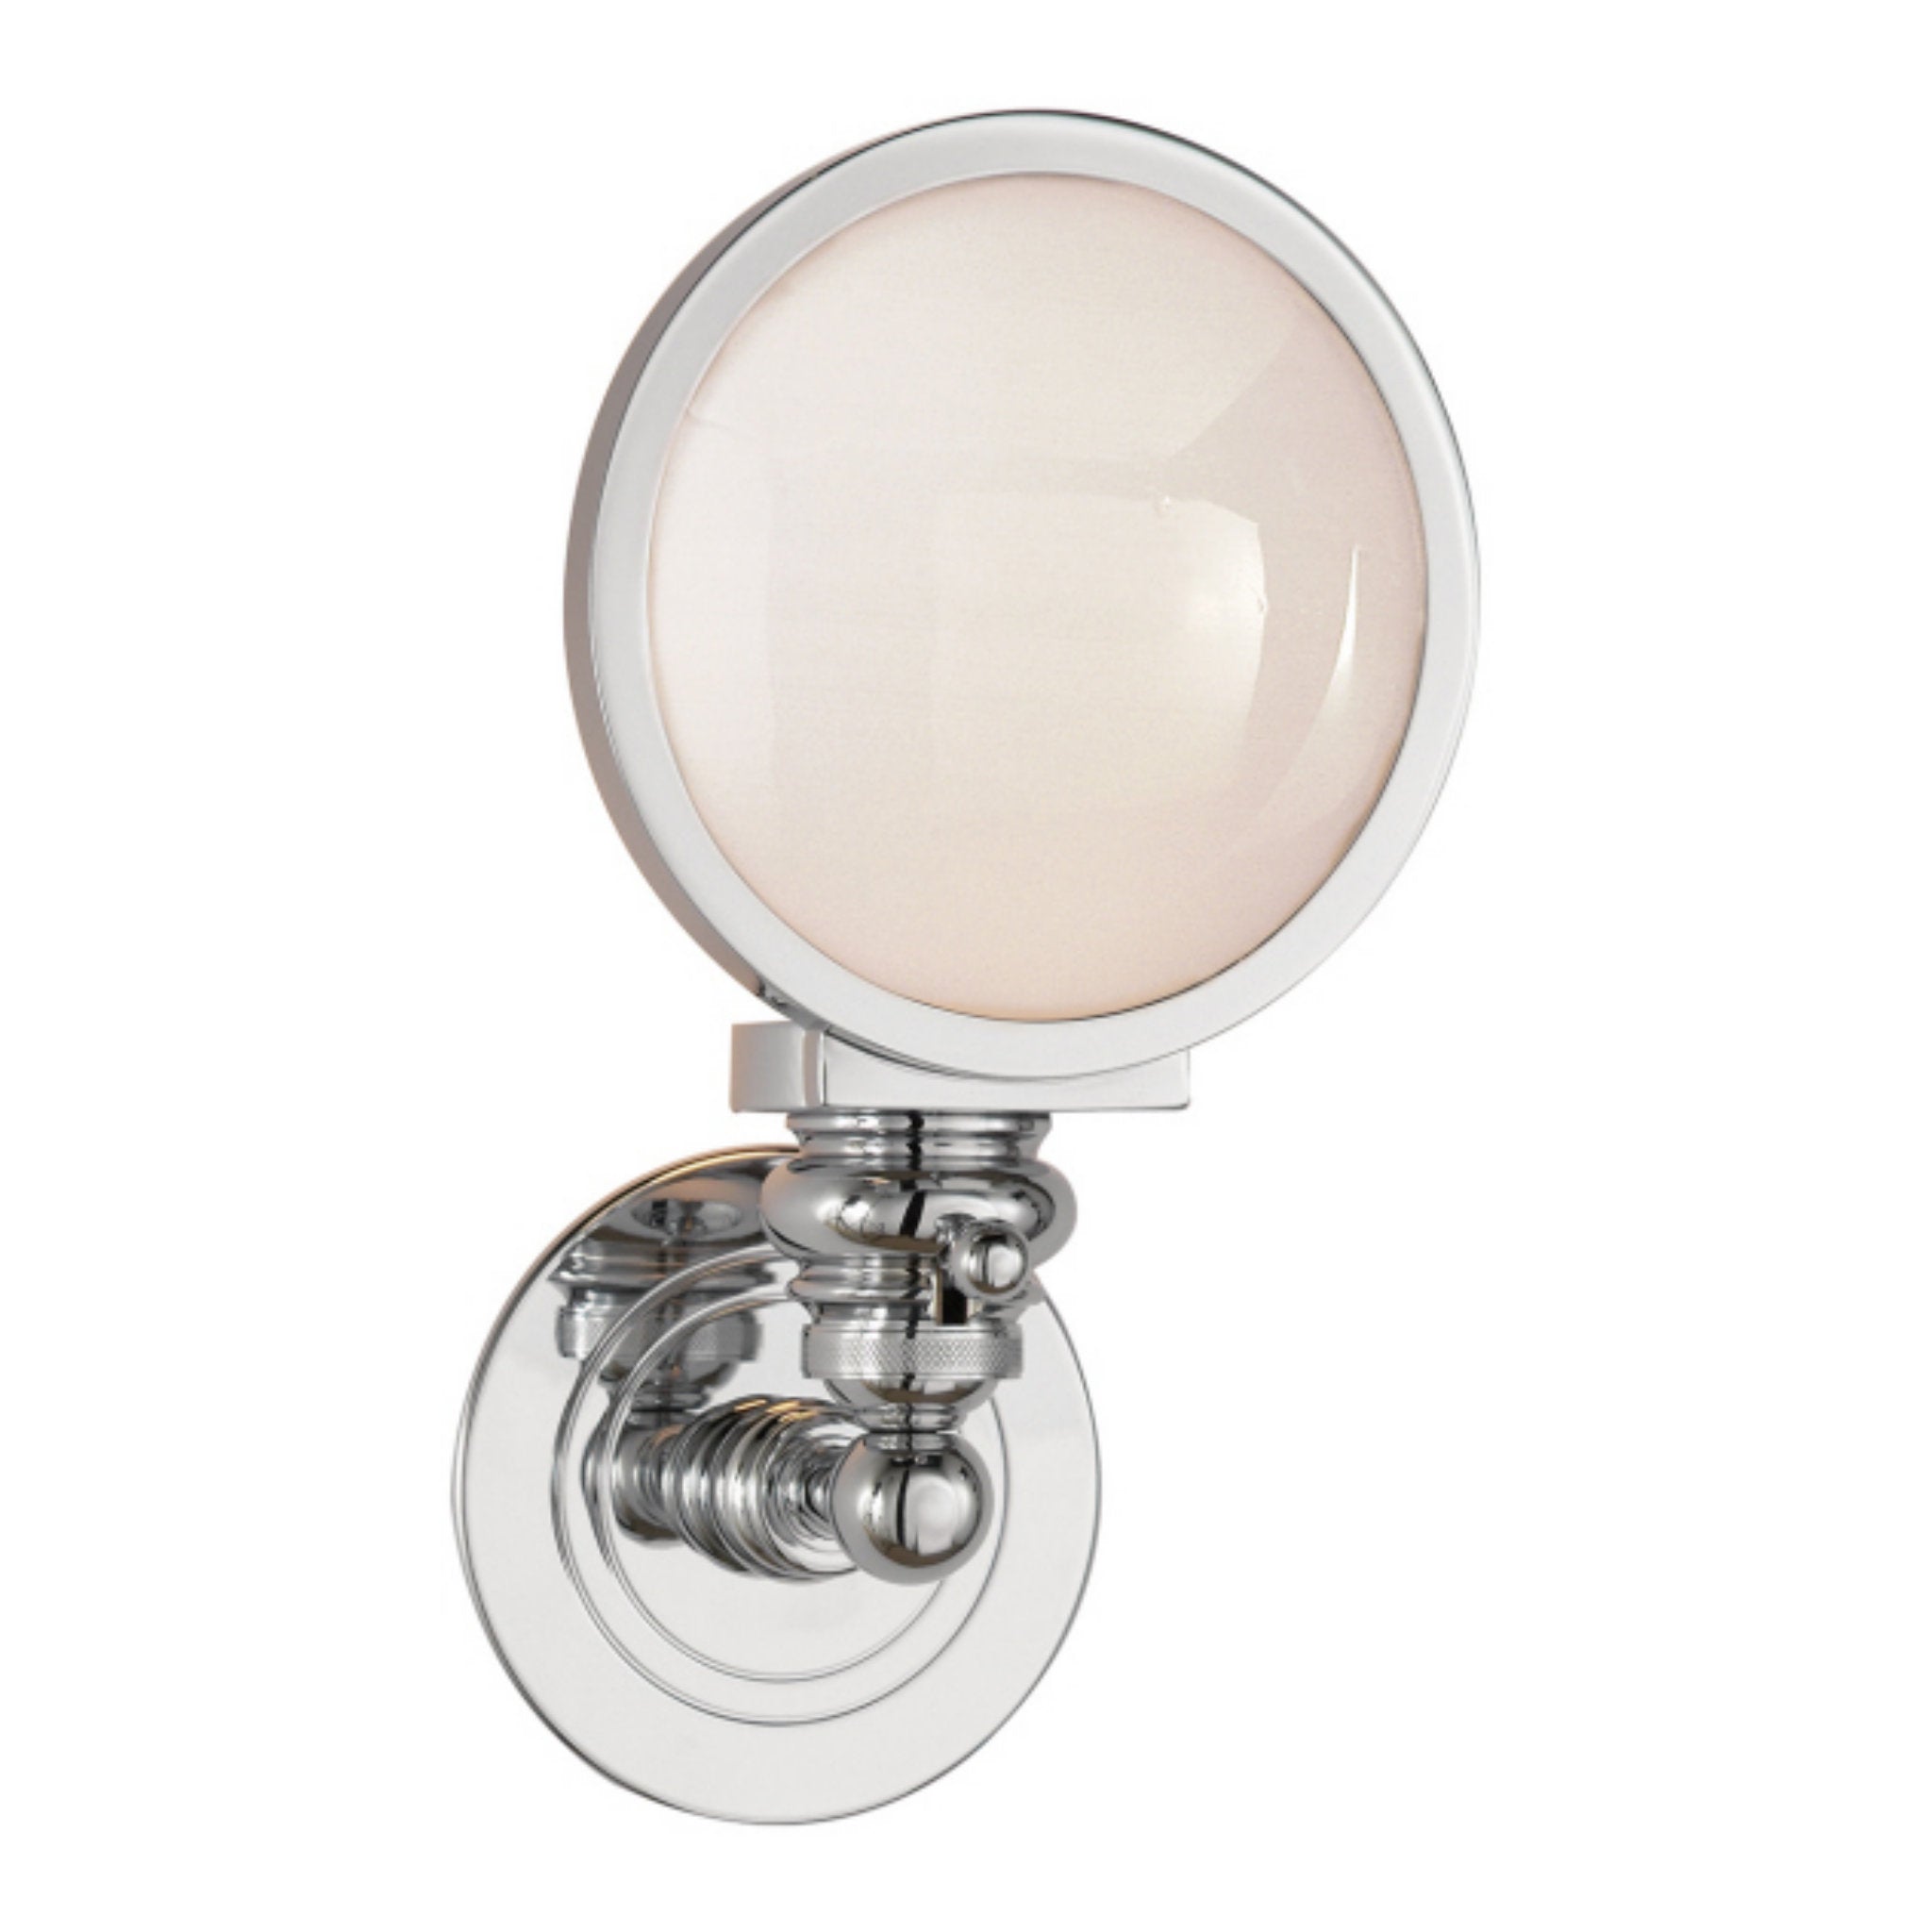 Chapman & Myers Boston Head Light Sconce in Chrome with White Glass